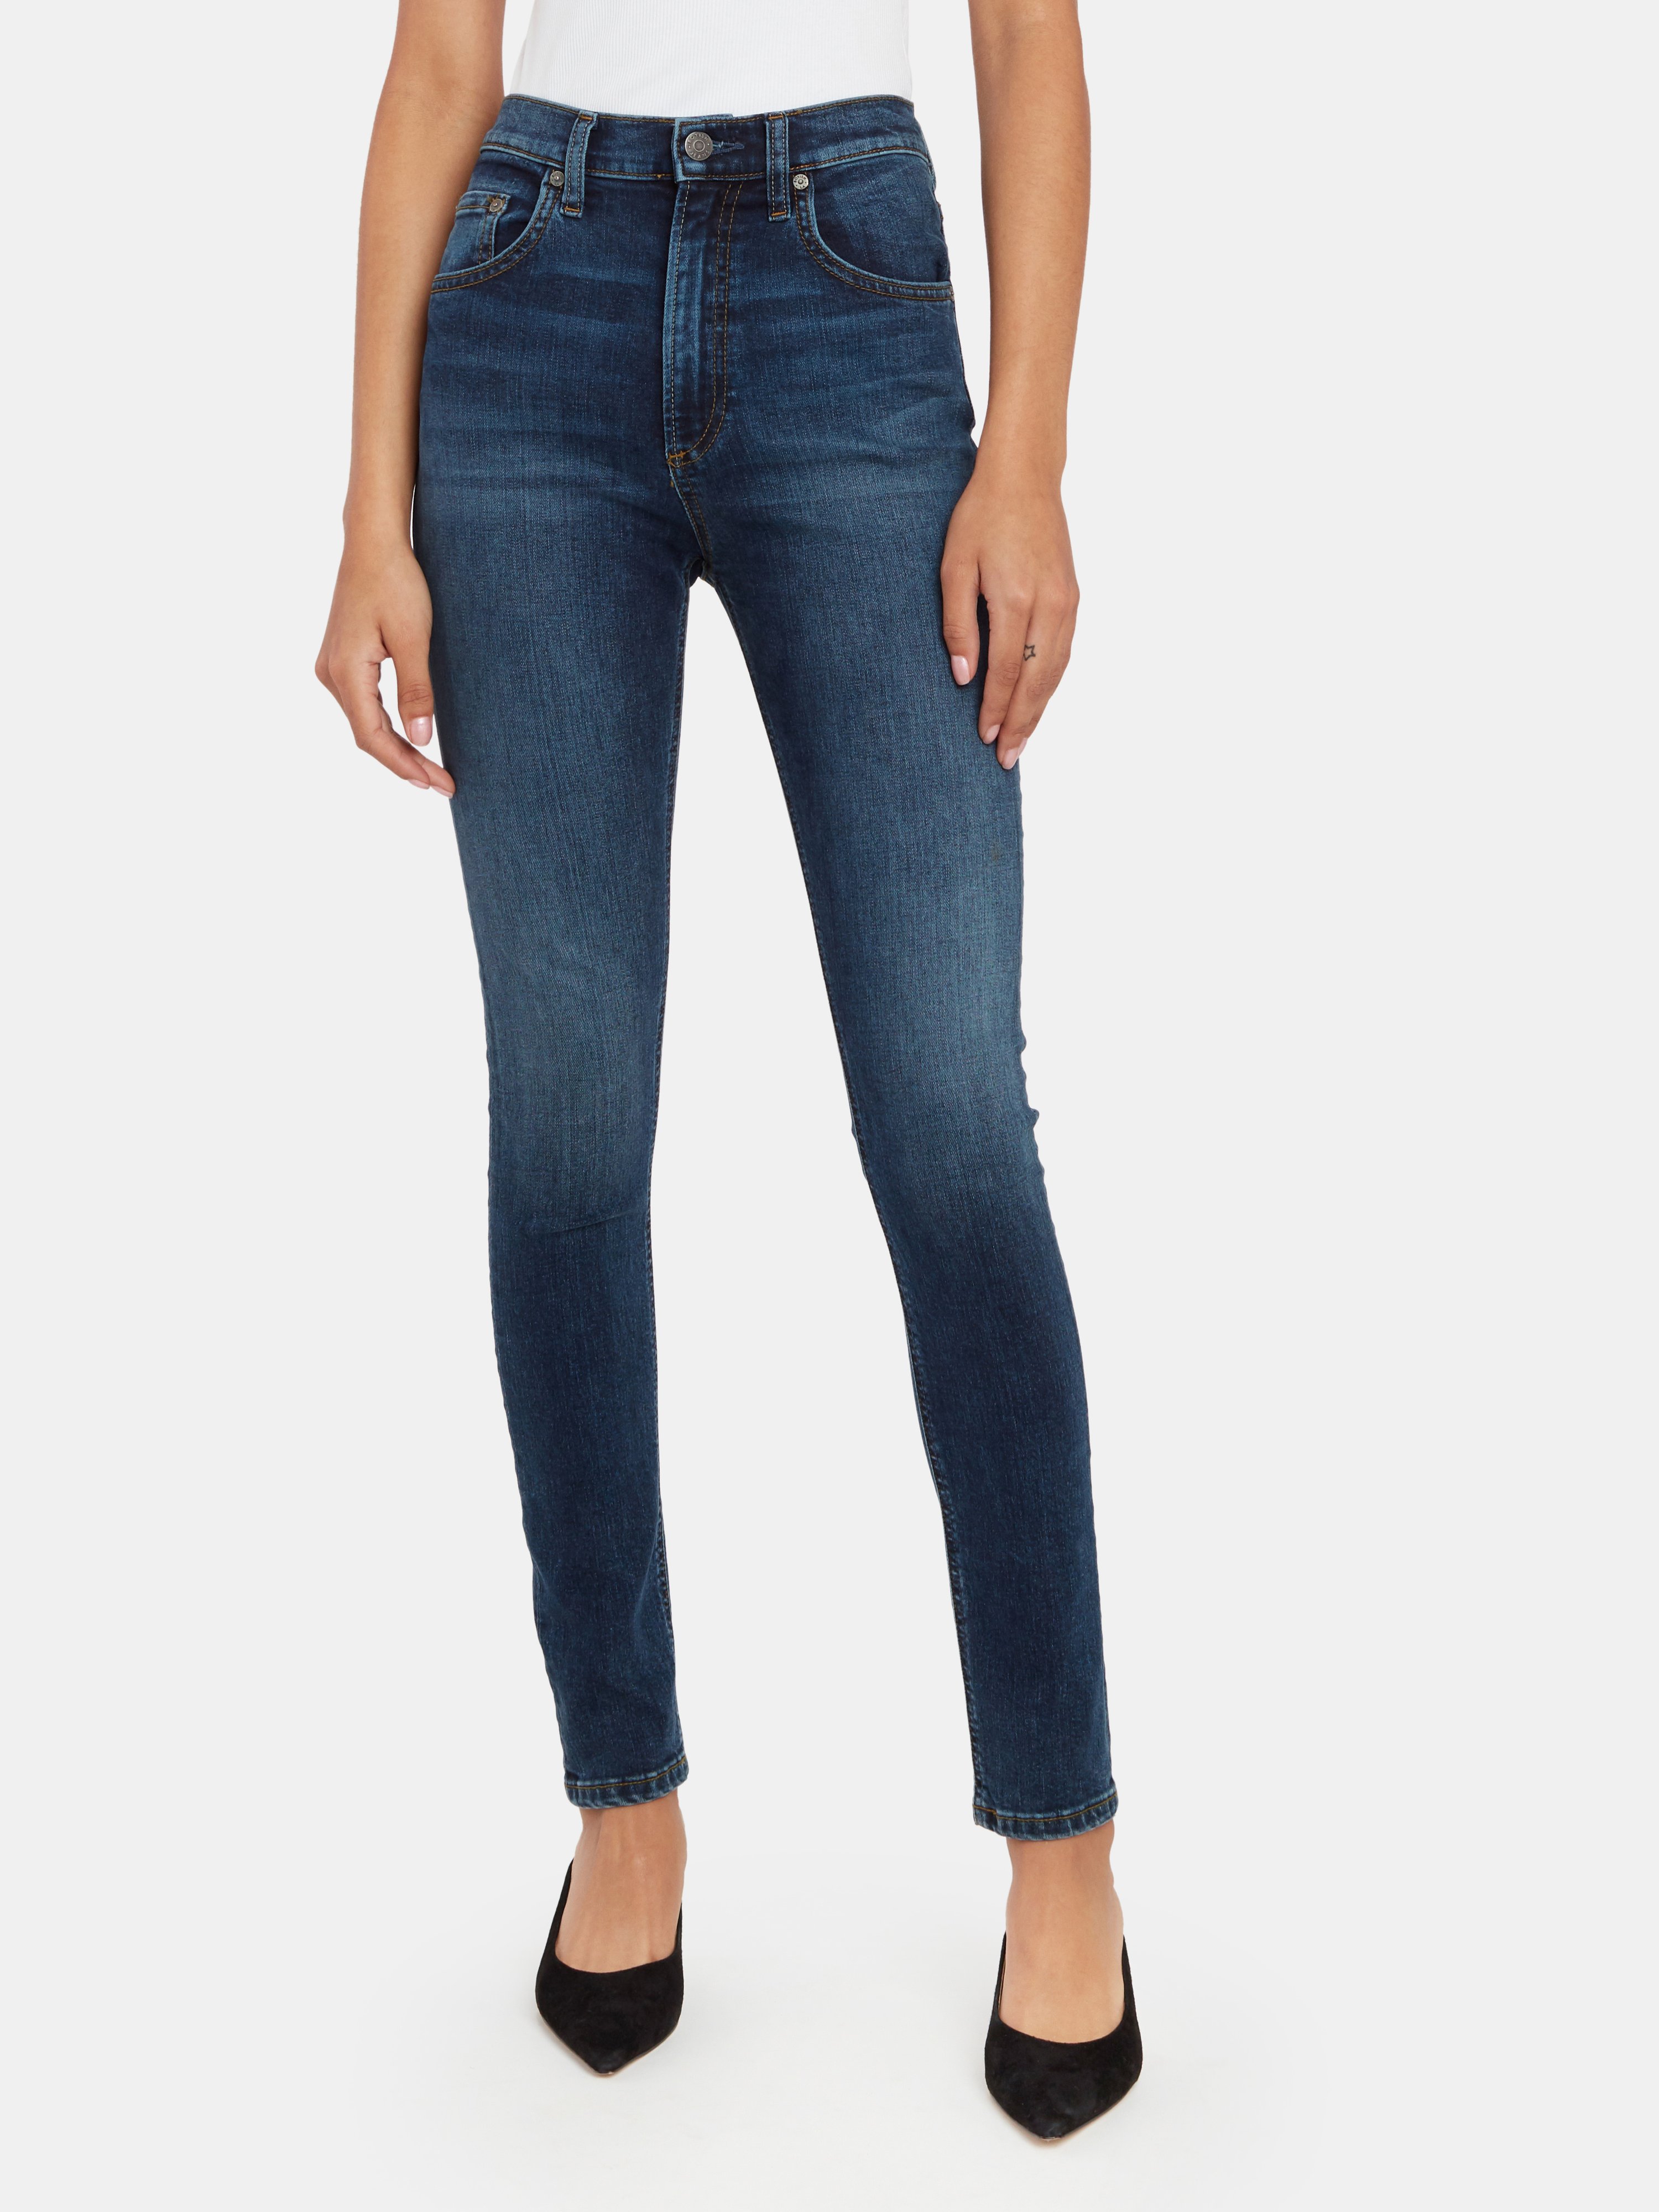 Boyish Jeans The Donny High Rise Skinny Jeans In Nights Of Cabiria